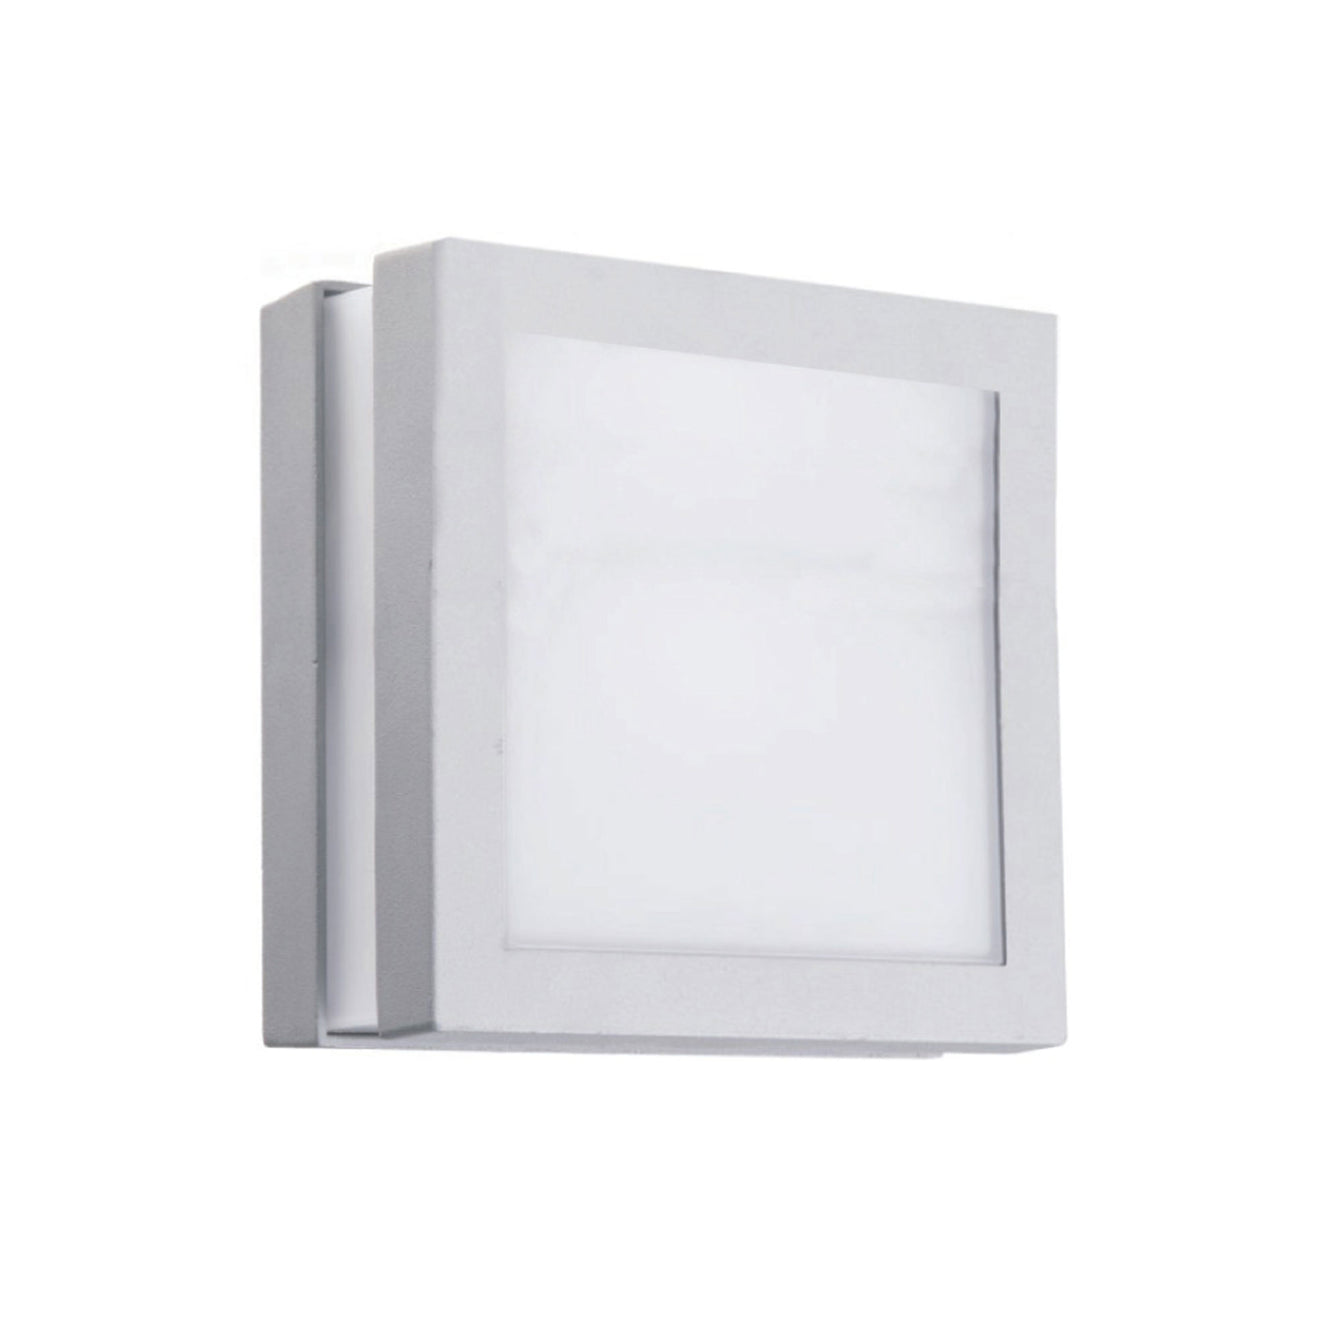 Iowa Outdoor Square and Round LED Light - Buy It Better Square